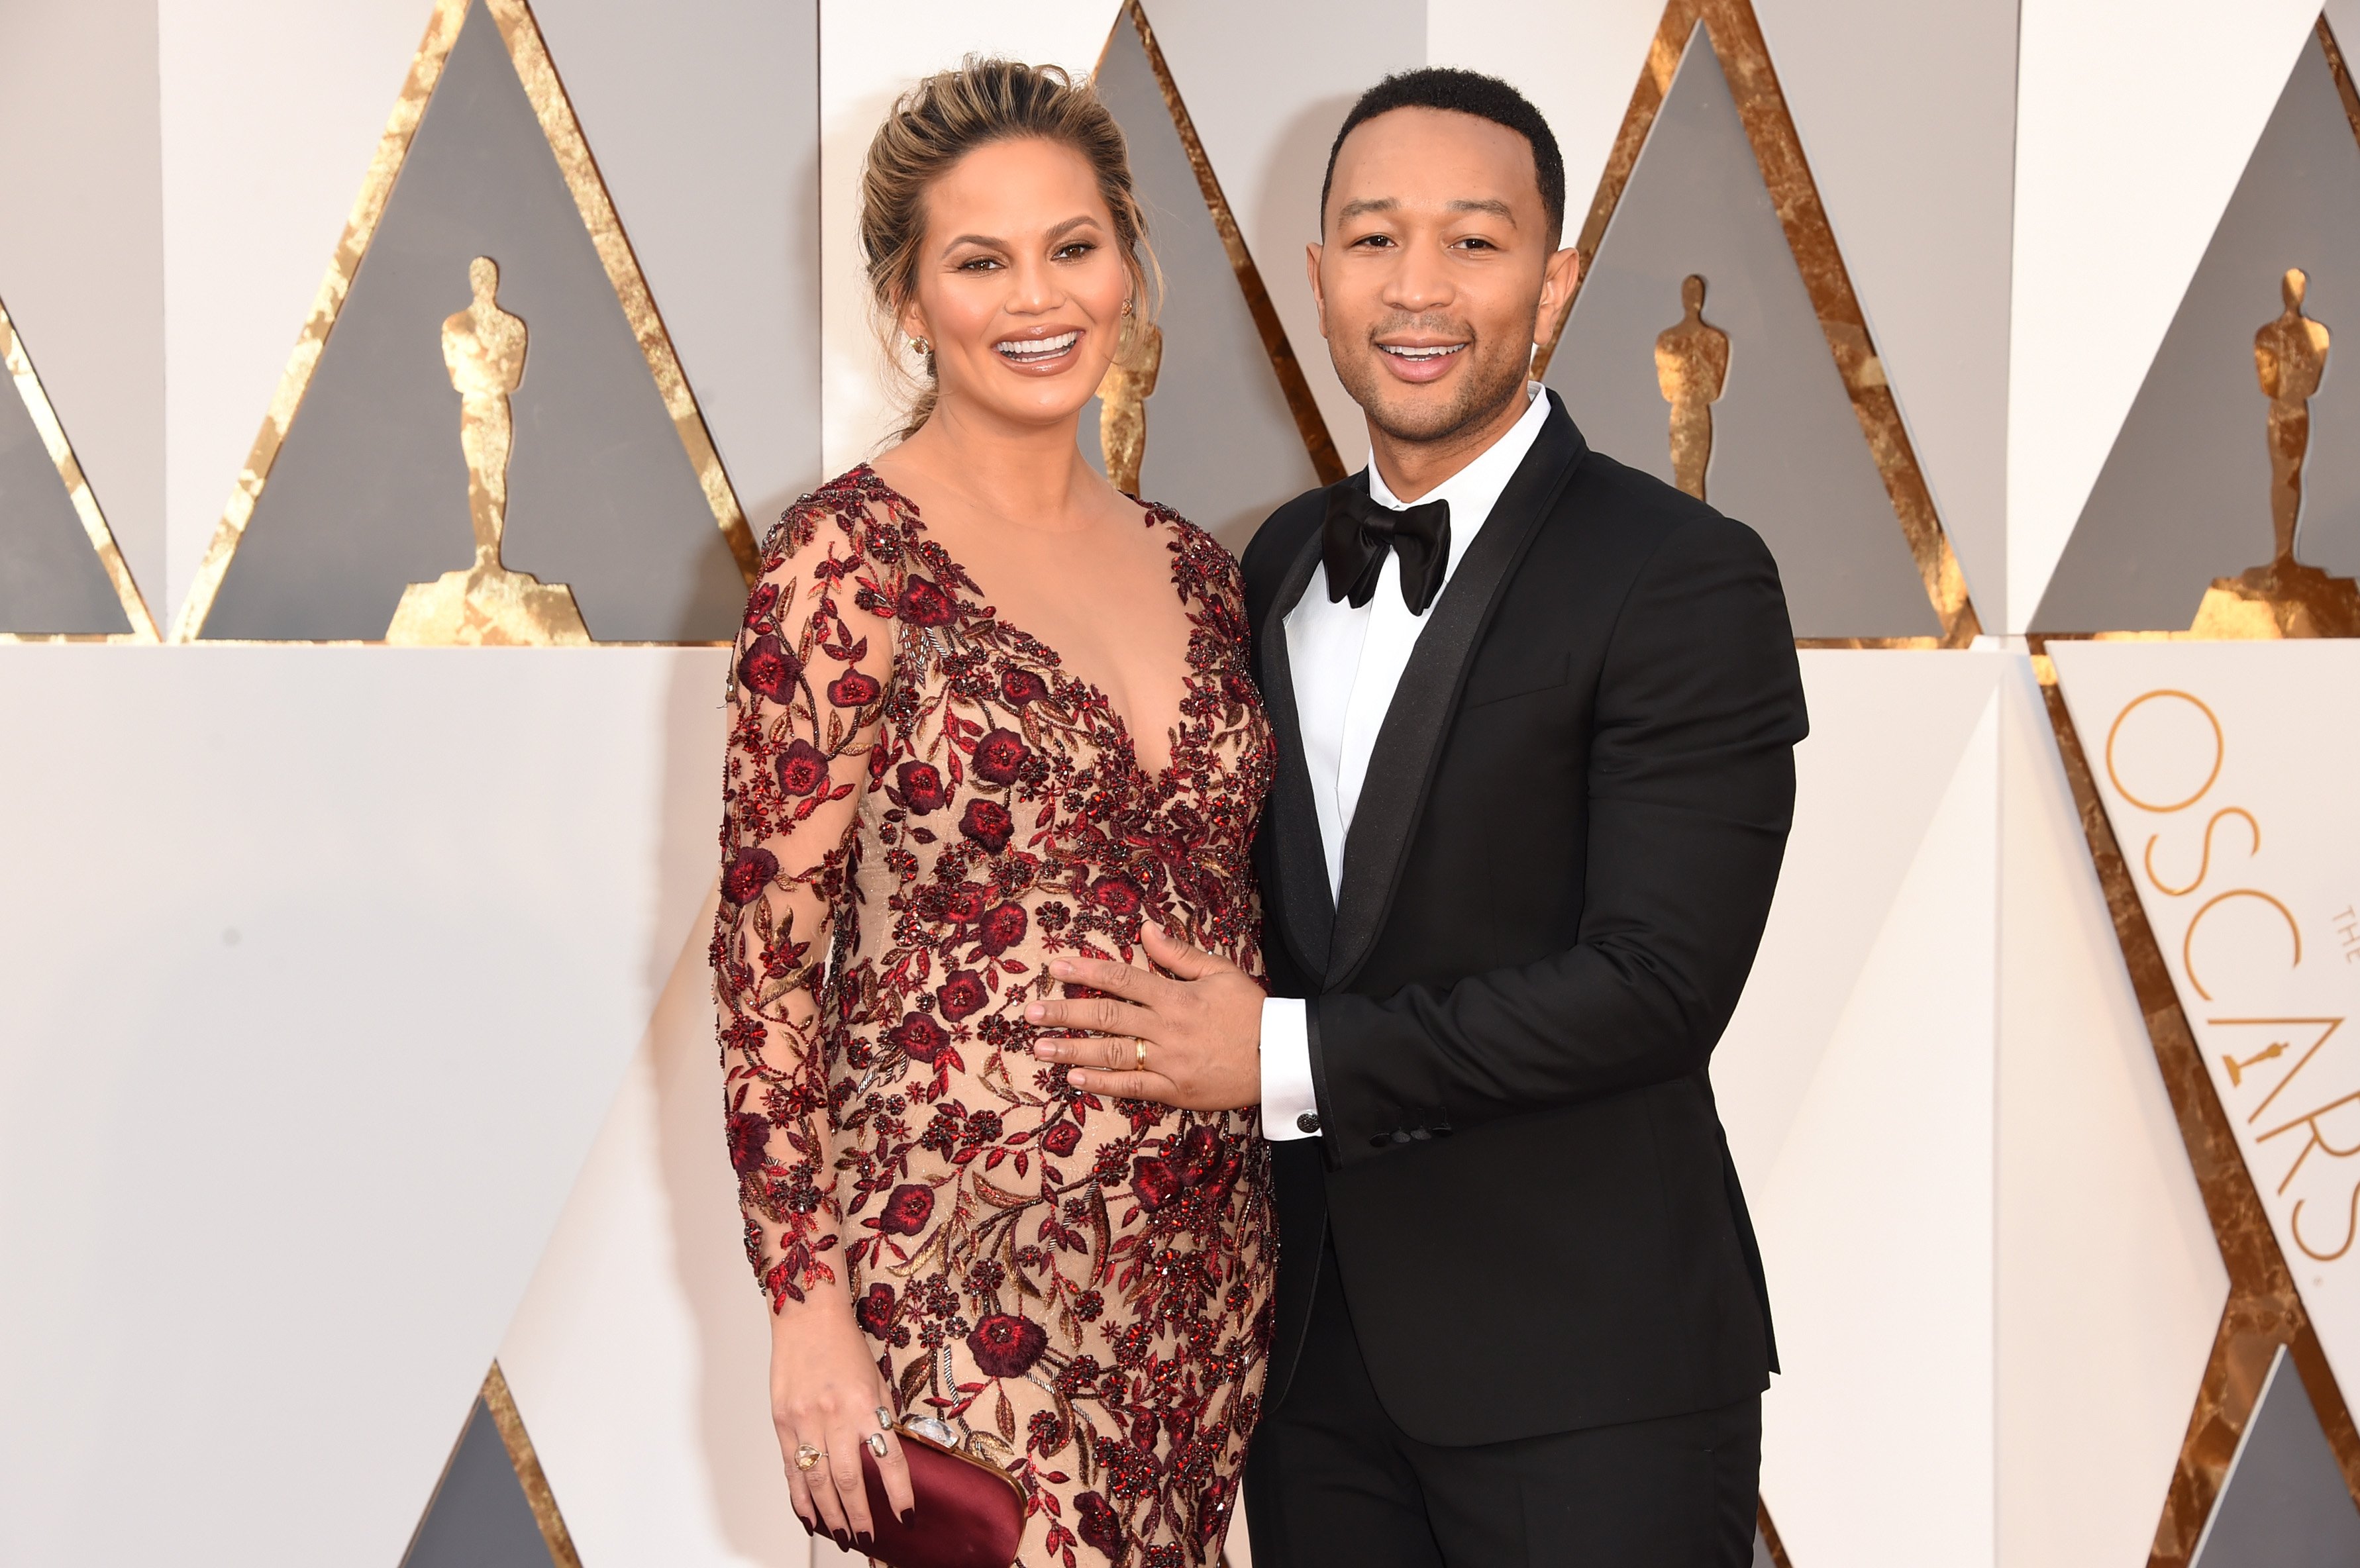 The A-list couple Chrissy Teigen and John Legend. | Photo: Getty Images